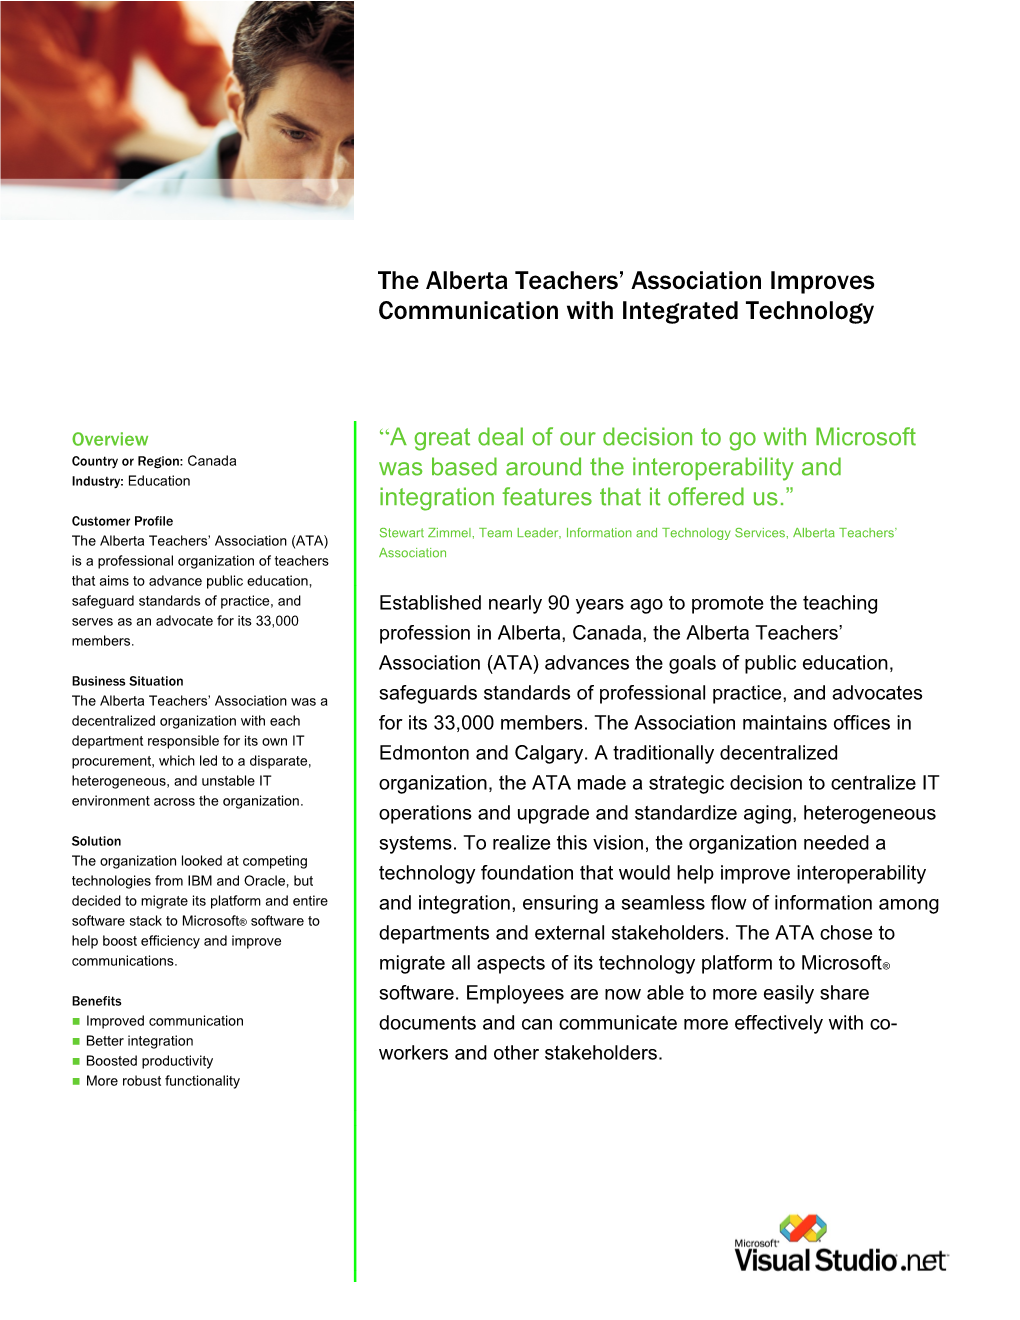 The Alberta Teachers Association Improves Communication with Integrated Technology